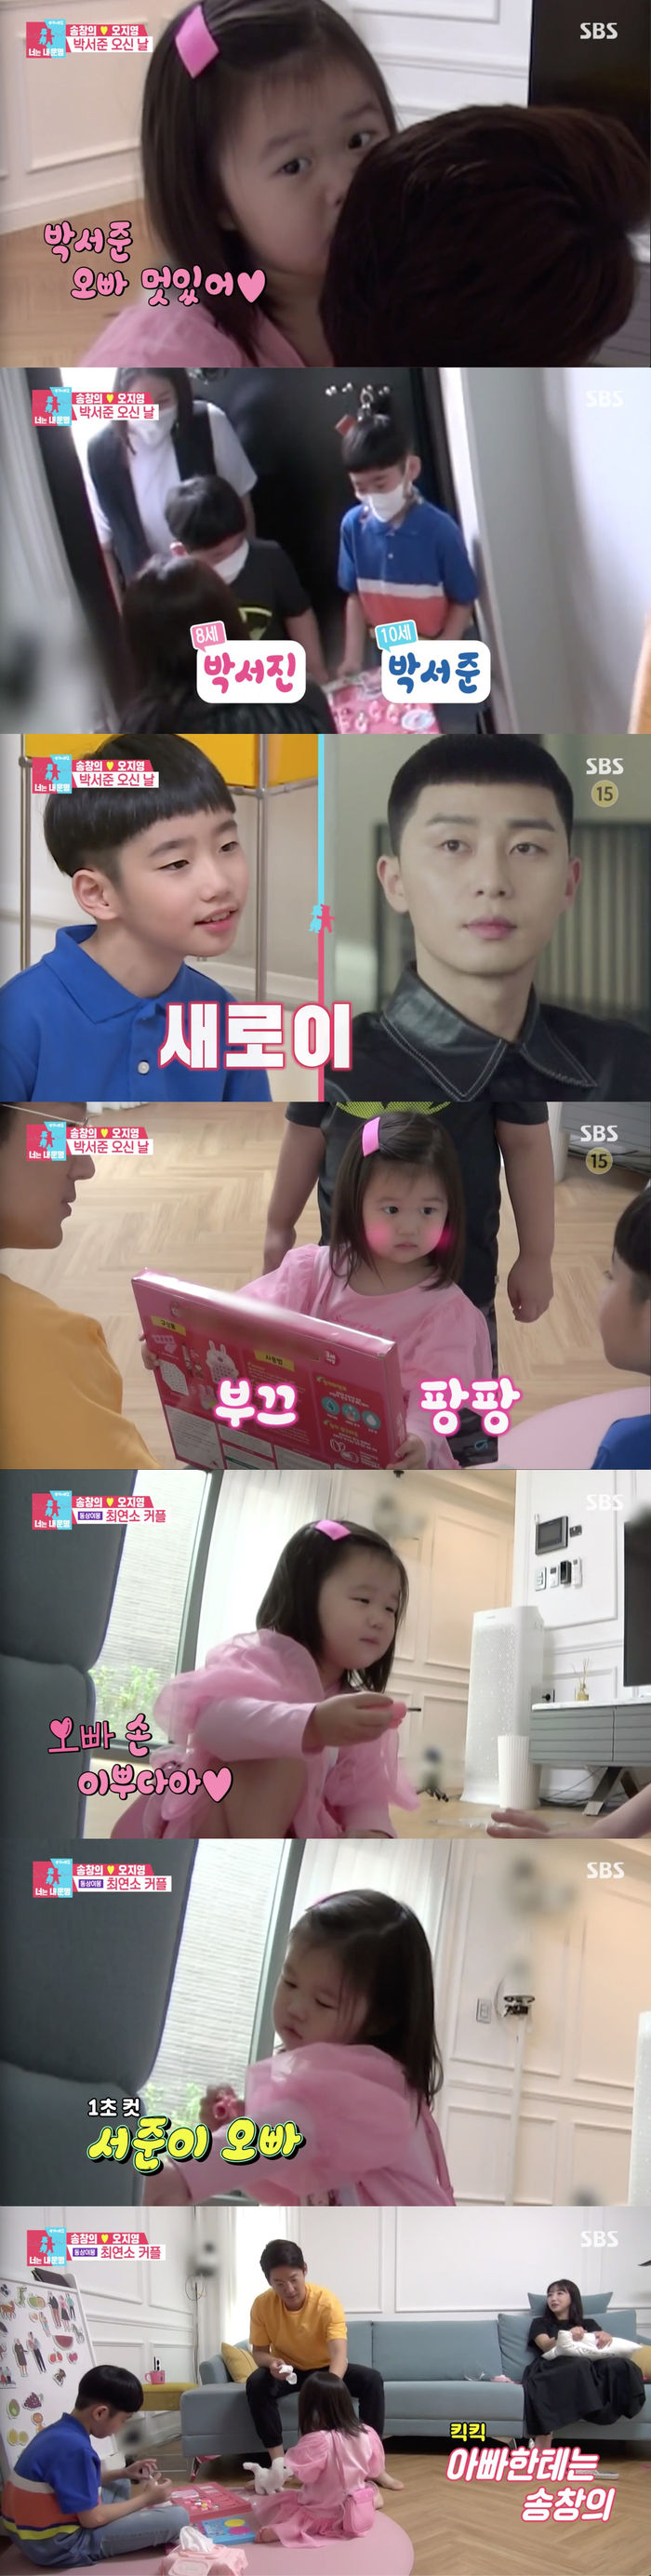 Song Chang-eui Jealous to daughters Southern SachinOn SBS Sangsangmong Season 2 - You Are My Destiny broadcasted on the 19th, the Song Chang-eui family waiting for Park Seo-joon was drawn.On the day of the broadcast, her daughter Ha-yul waited for Father, saying, Its time for Seo-joon brother.And Ha-yul caught the eye by saying to Song Chang-eui in his whisper, Park Seo-joon brother is cool.After a while, when the bell rang, Ha-yul ran to the front door one step to meet Park Seo-joon.The appearance of Park Seo-joon so long, but the performers made a sound of regret.What Ha-yul waited for was not the actor Park Seo-joon but the neighbor brother Park Seo-joon.So Song Chang-eui said, I am the son of my wifes friend and his name is Park Seo-joon.Song Chang-eui looked at Park Seo-joon and admired Seo-joon is handsome.And the performers who watched it praised the appearance that resembled Park Seo-joon.He was not sure how to keep an eye on Park Seo-joon, and he kept playing with him, and he did not hide his candid affection, saying, My brothers hand is beautiful.Song Chang-eui, who saw this, said, My daughter likes it so much that Jealous comes out. So Lim Jung-eun also agreed, Our groom does it.I am young, but I am Jealous, said Song Chang-eui, I did not like it.In particular, Song Chang-eui could not hide Jealous in the title that his daughter Hayul called brother towards Park Seo-joon, who said, How are you, brother?Father said, I do not even call him Father, I have to be creative. And he said, I am upset when I see a big relationship later. So Oh Ji-young asked, Who is better with my brother and father?Then, without a second of hesitation, Ha-yul replied, Seo-joon is my brother and encouraged the Jealous of Song Chang-eui.